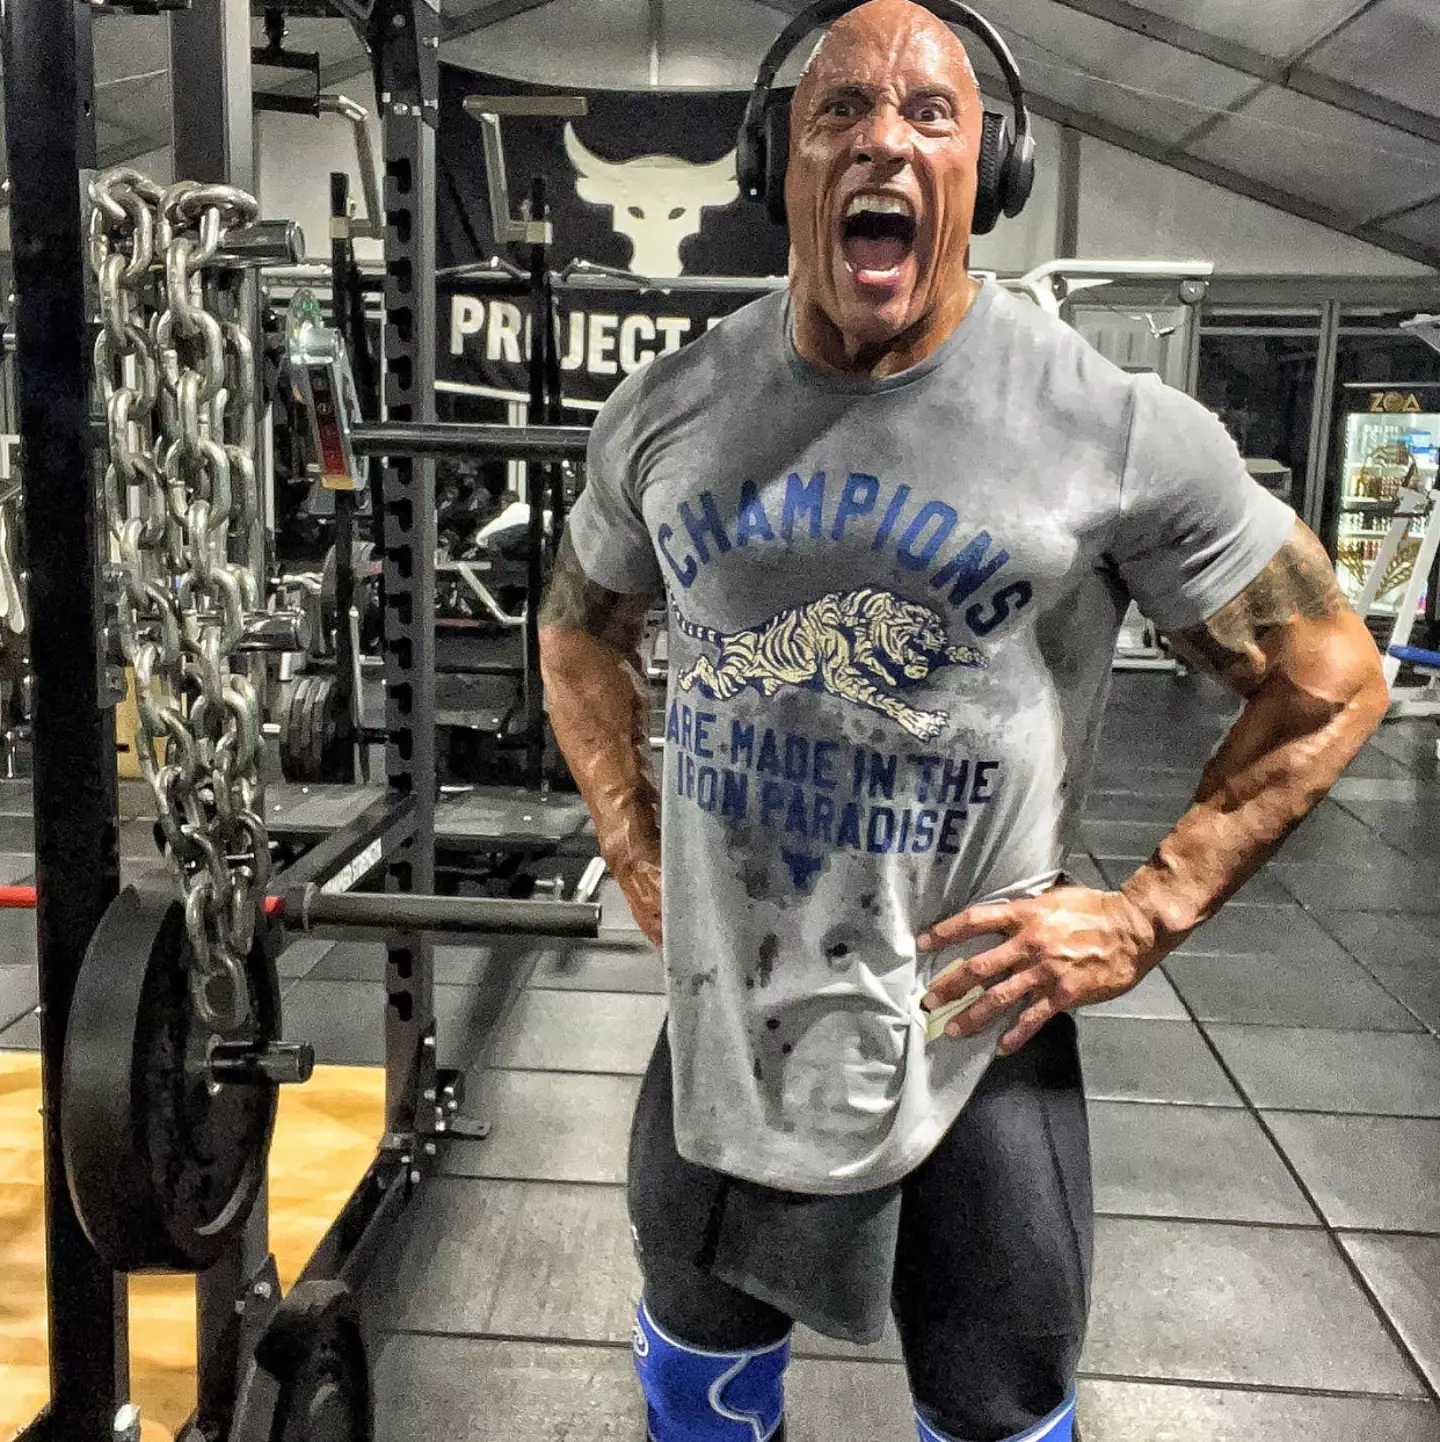 It seems as if Dwayne Johnson has a peculiar habit in the gym.